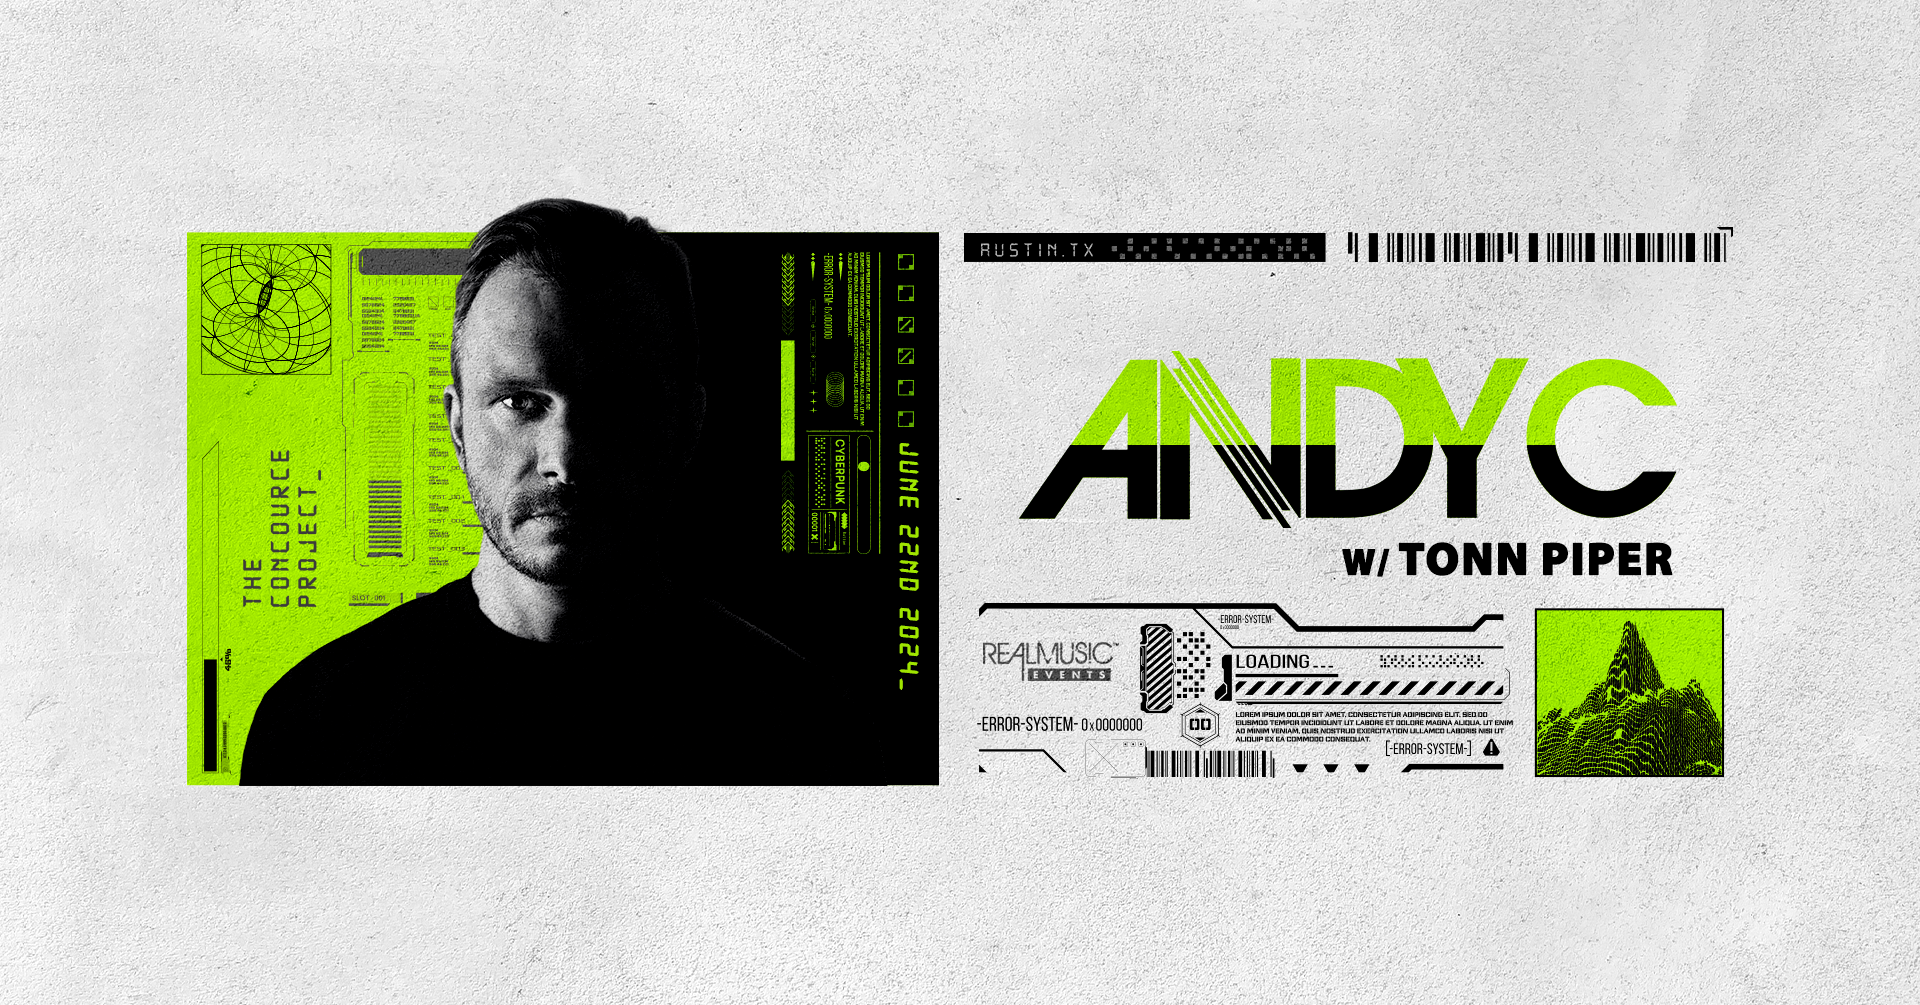 Andy C with Tonn Piper - Página frontal